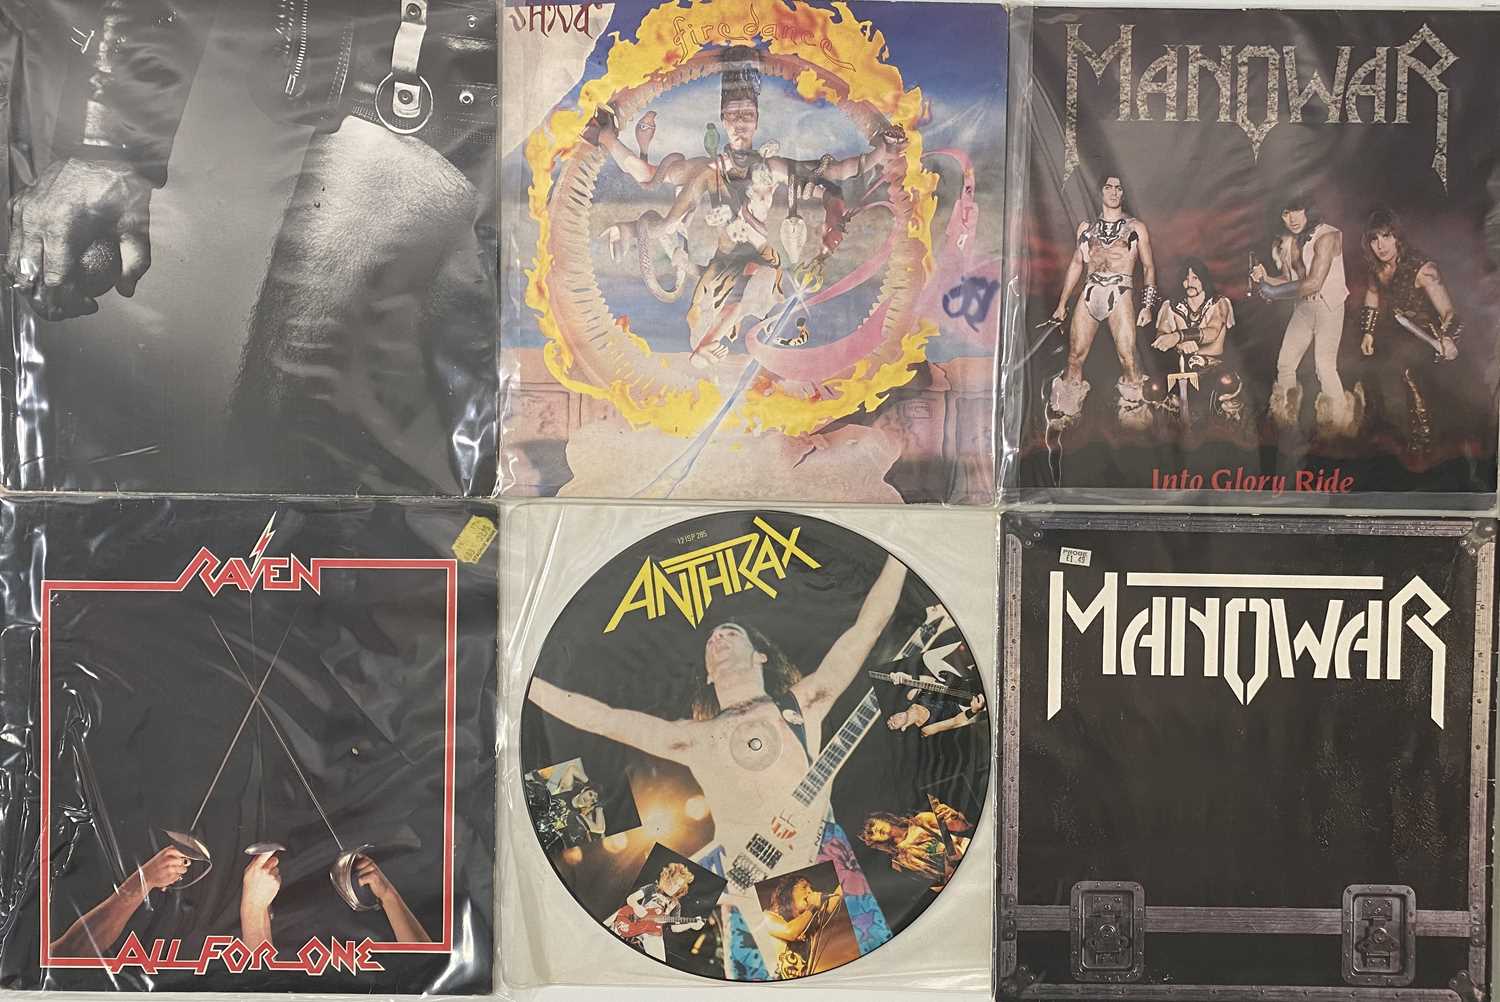 METAL - LP / 12" COLLECTION - Image 4 of 6